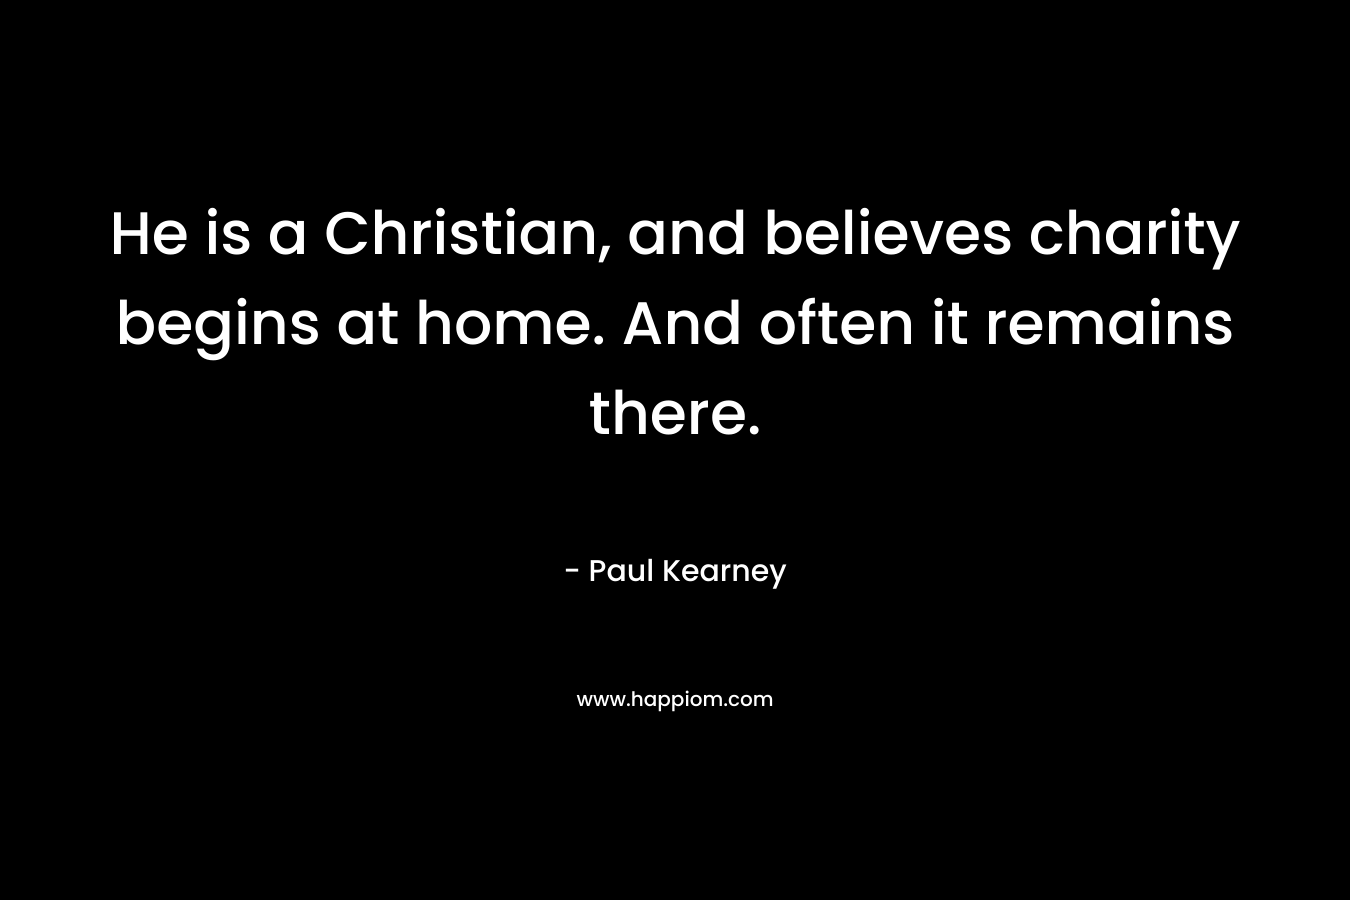 He is a Christian, and believes charity begins at home. And often it remains there. – Paul Kearney